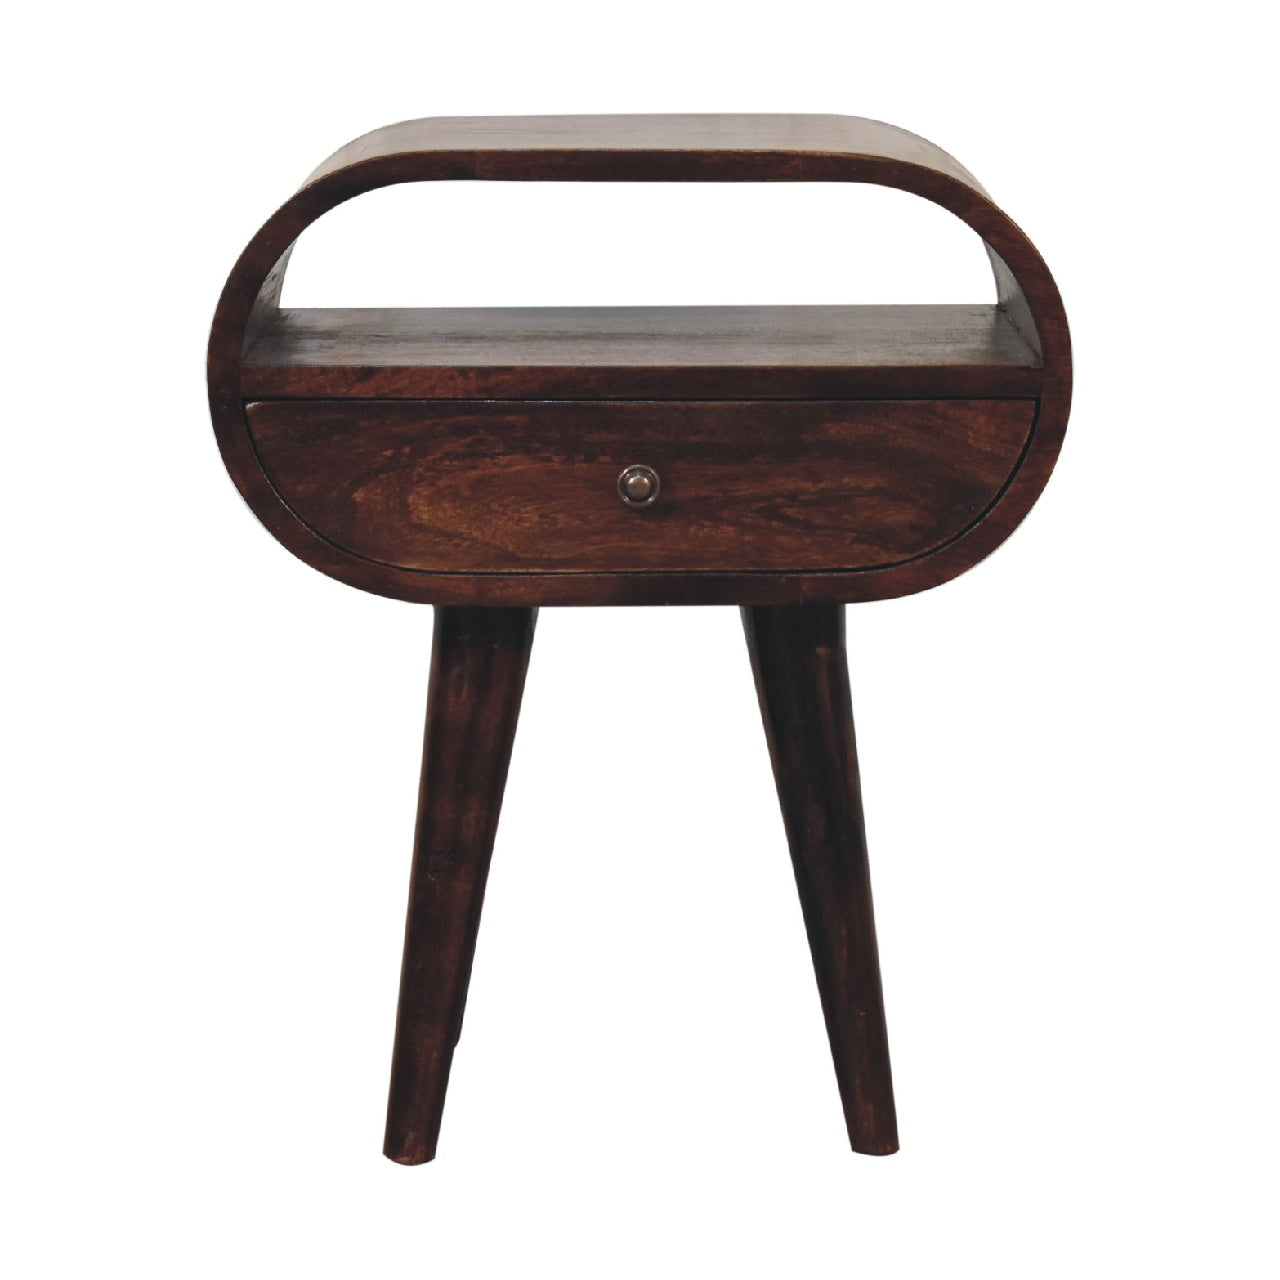 View Light Walnut Circular Bedside with Open Slot information